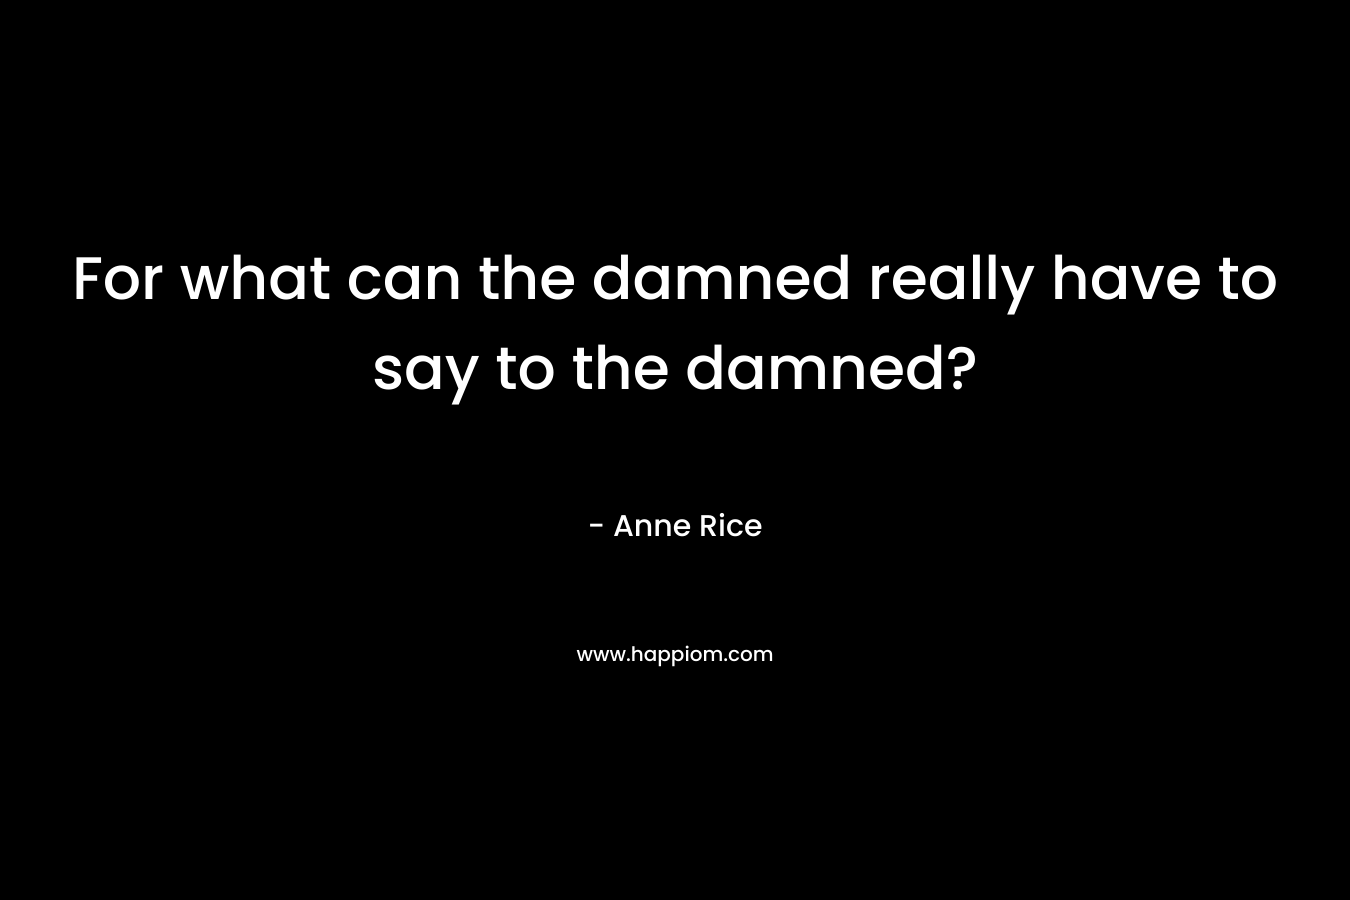 For what can the damned really have to say to the damned? – Anne Rice